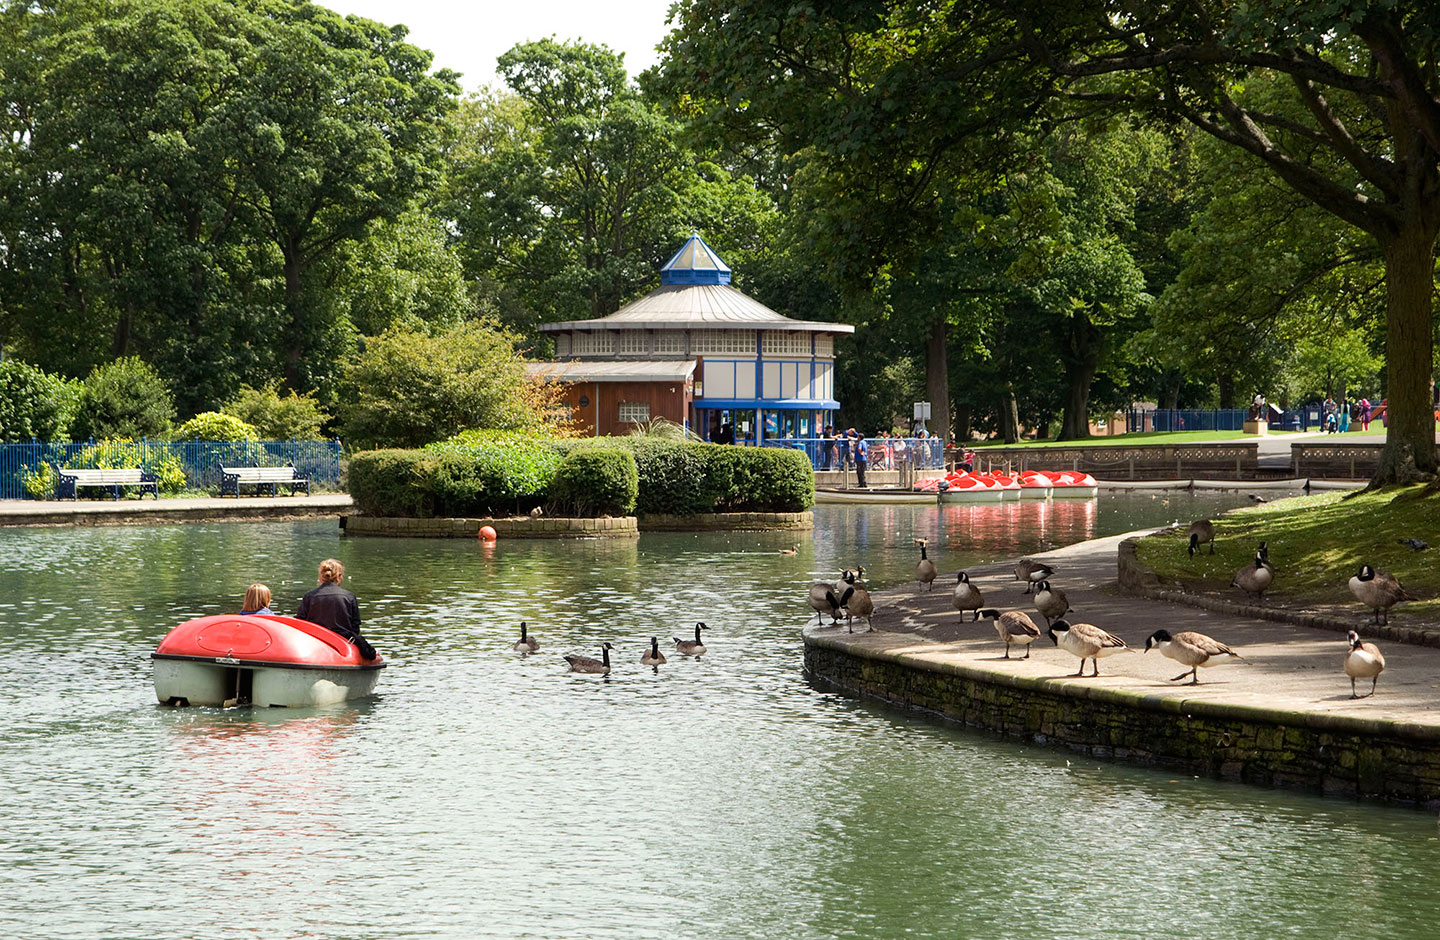 The lake was one of the first features to be constructed for Bradford’s new Lister Park in 1870s.